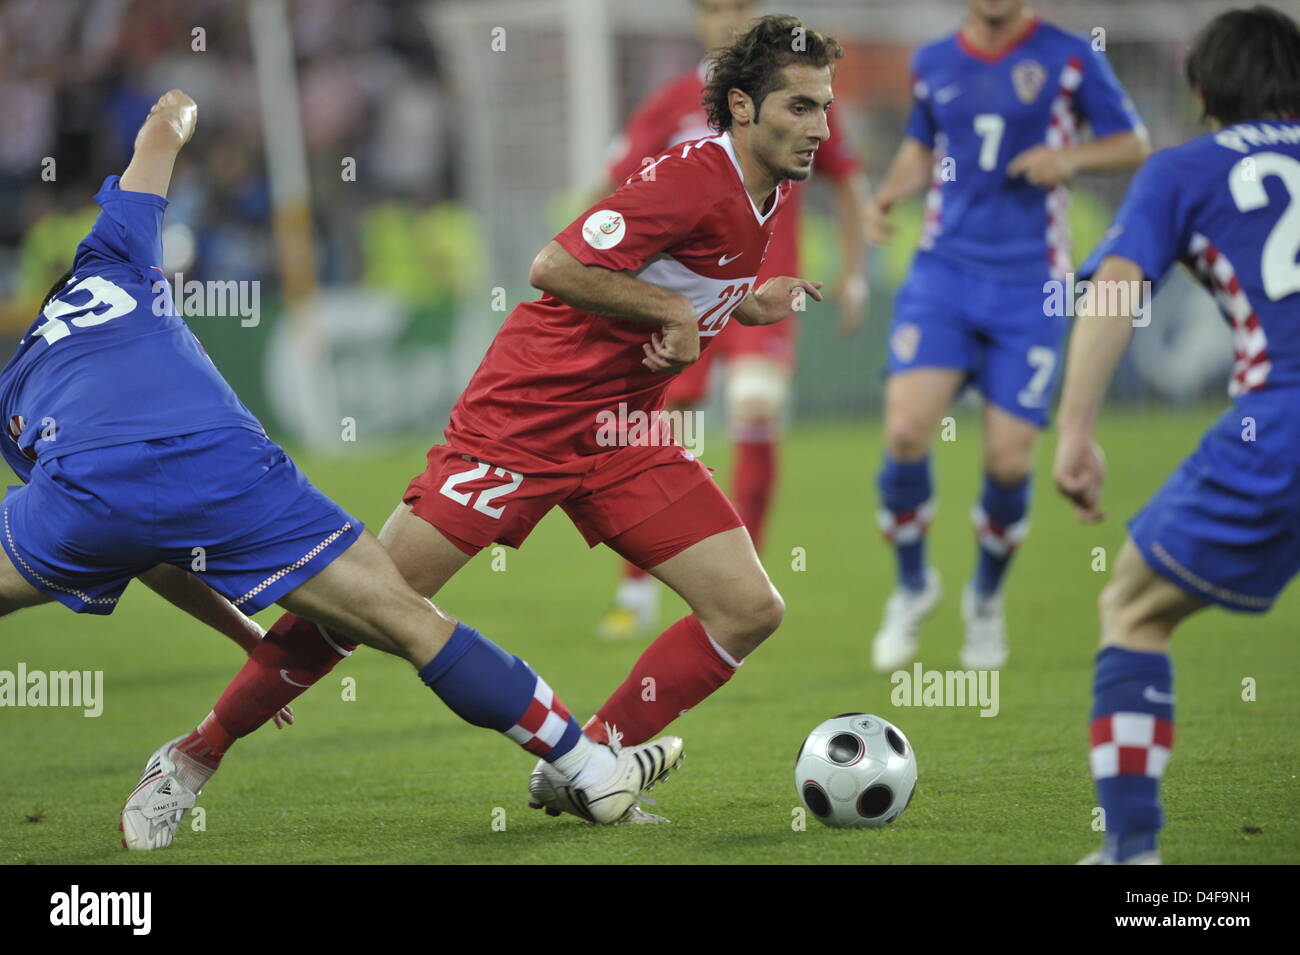 Niko Krancjar (L) and Danijel Pranjic (R) of Croatia vie with Hamit Altintop (C) of Turkey during the UEFA EURO 2008 quarter final match between Croatia and Turkey at the Ernst Happel stadium in Vienna, Austria, 20 June 2008. Photo: Achim Scheidemann dpa +please note UEFA restrictions particulary in regard to slide shows and 'No Mobile Services'+ +++(c) dpa - Bildfunk+++ Stock Photo